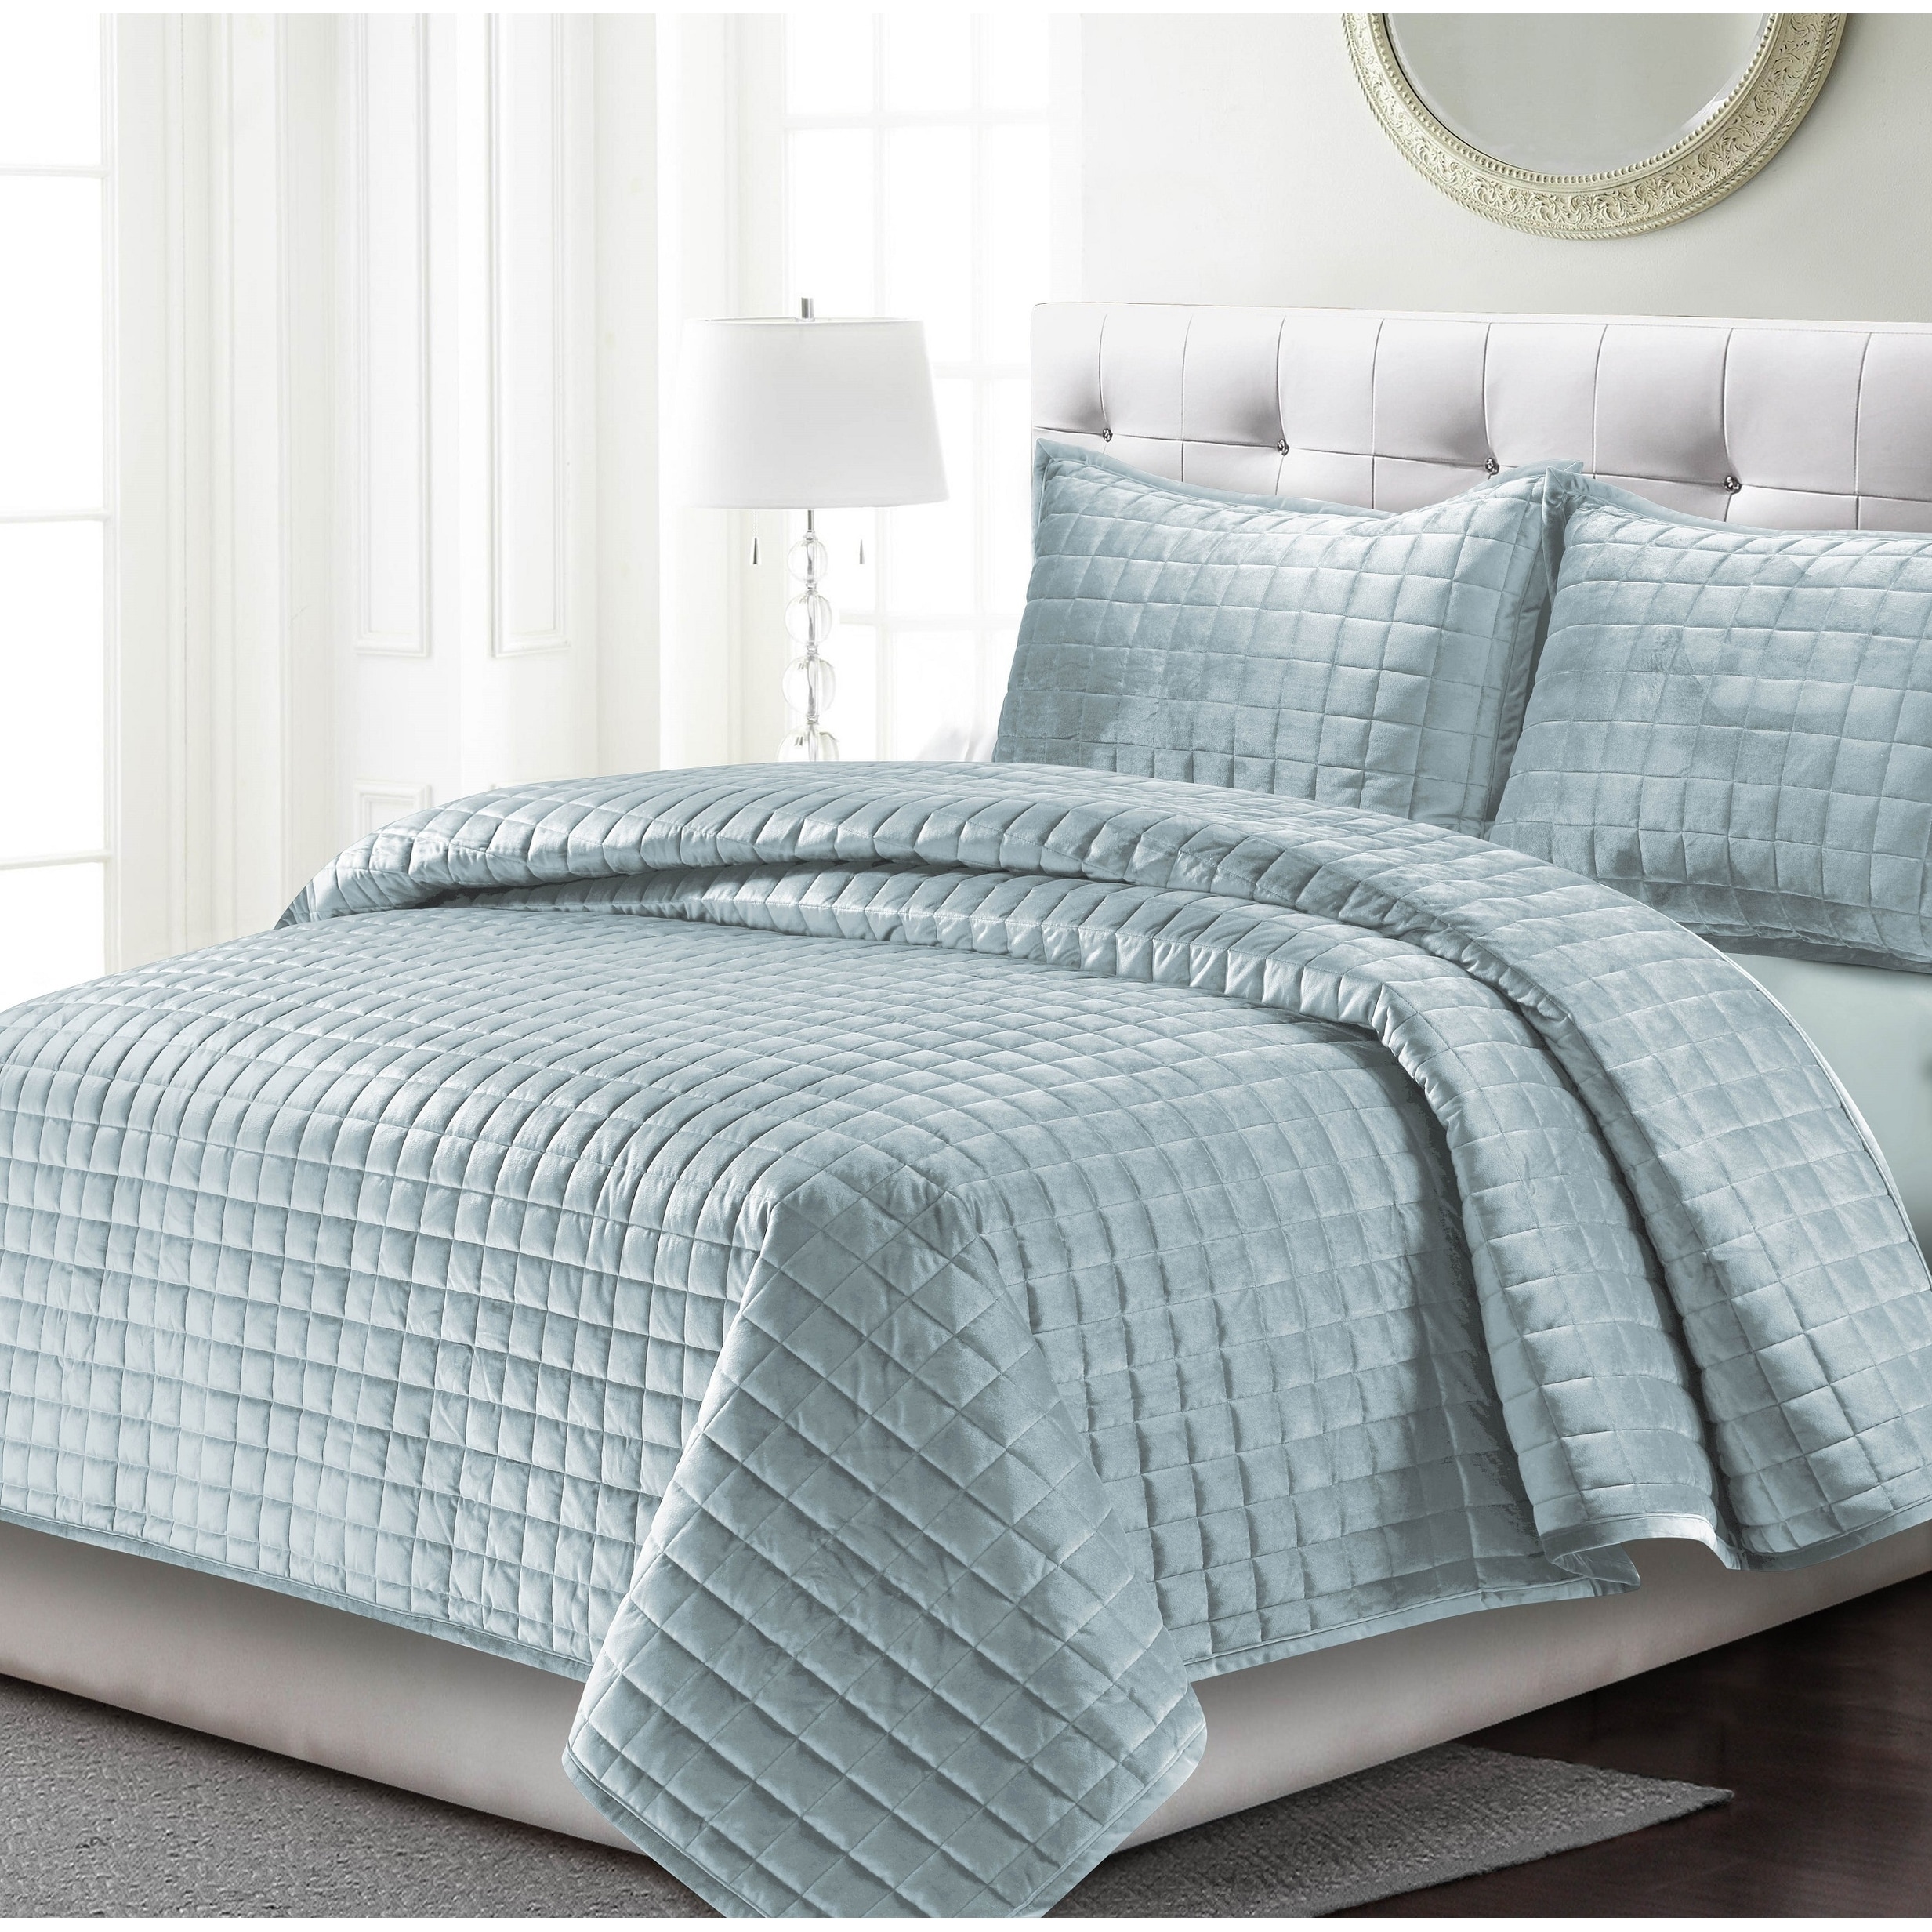 Florence Fitted Bedspread Set 